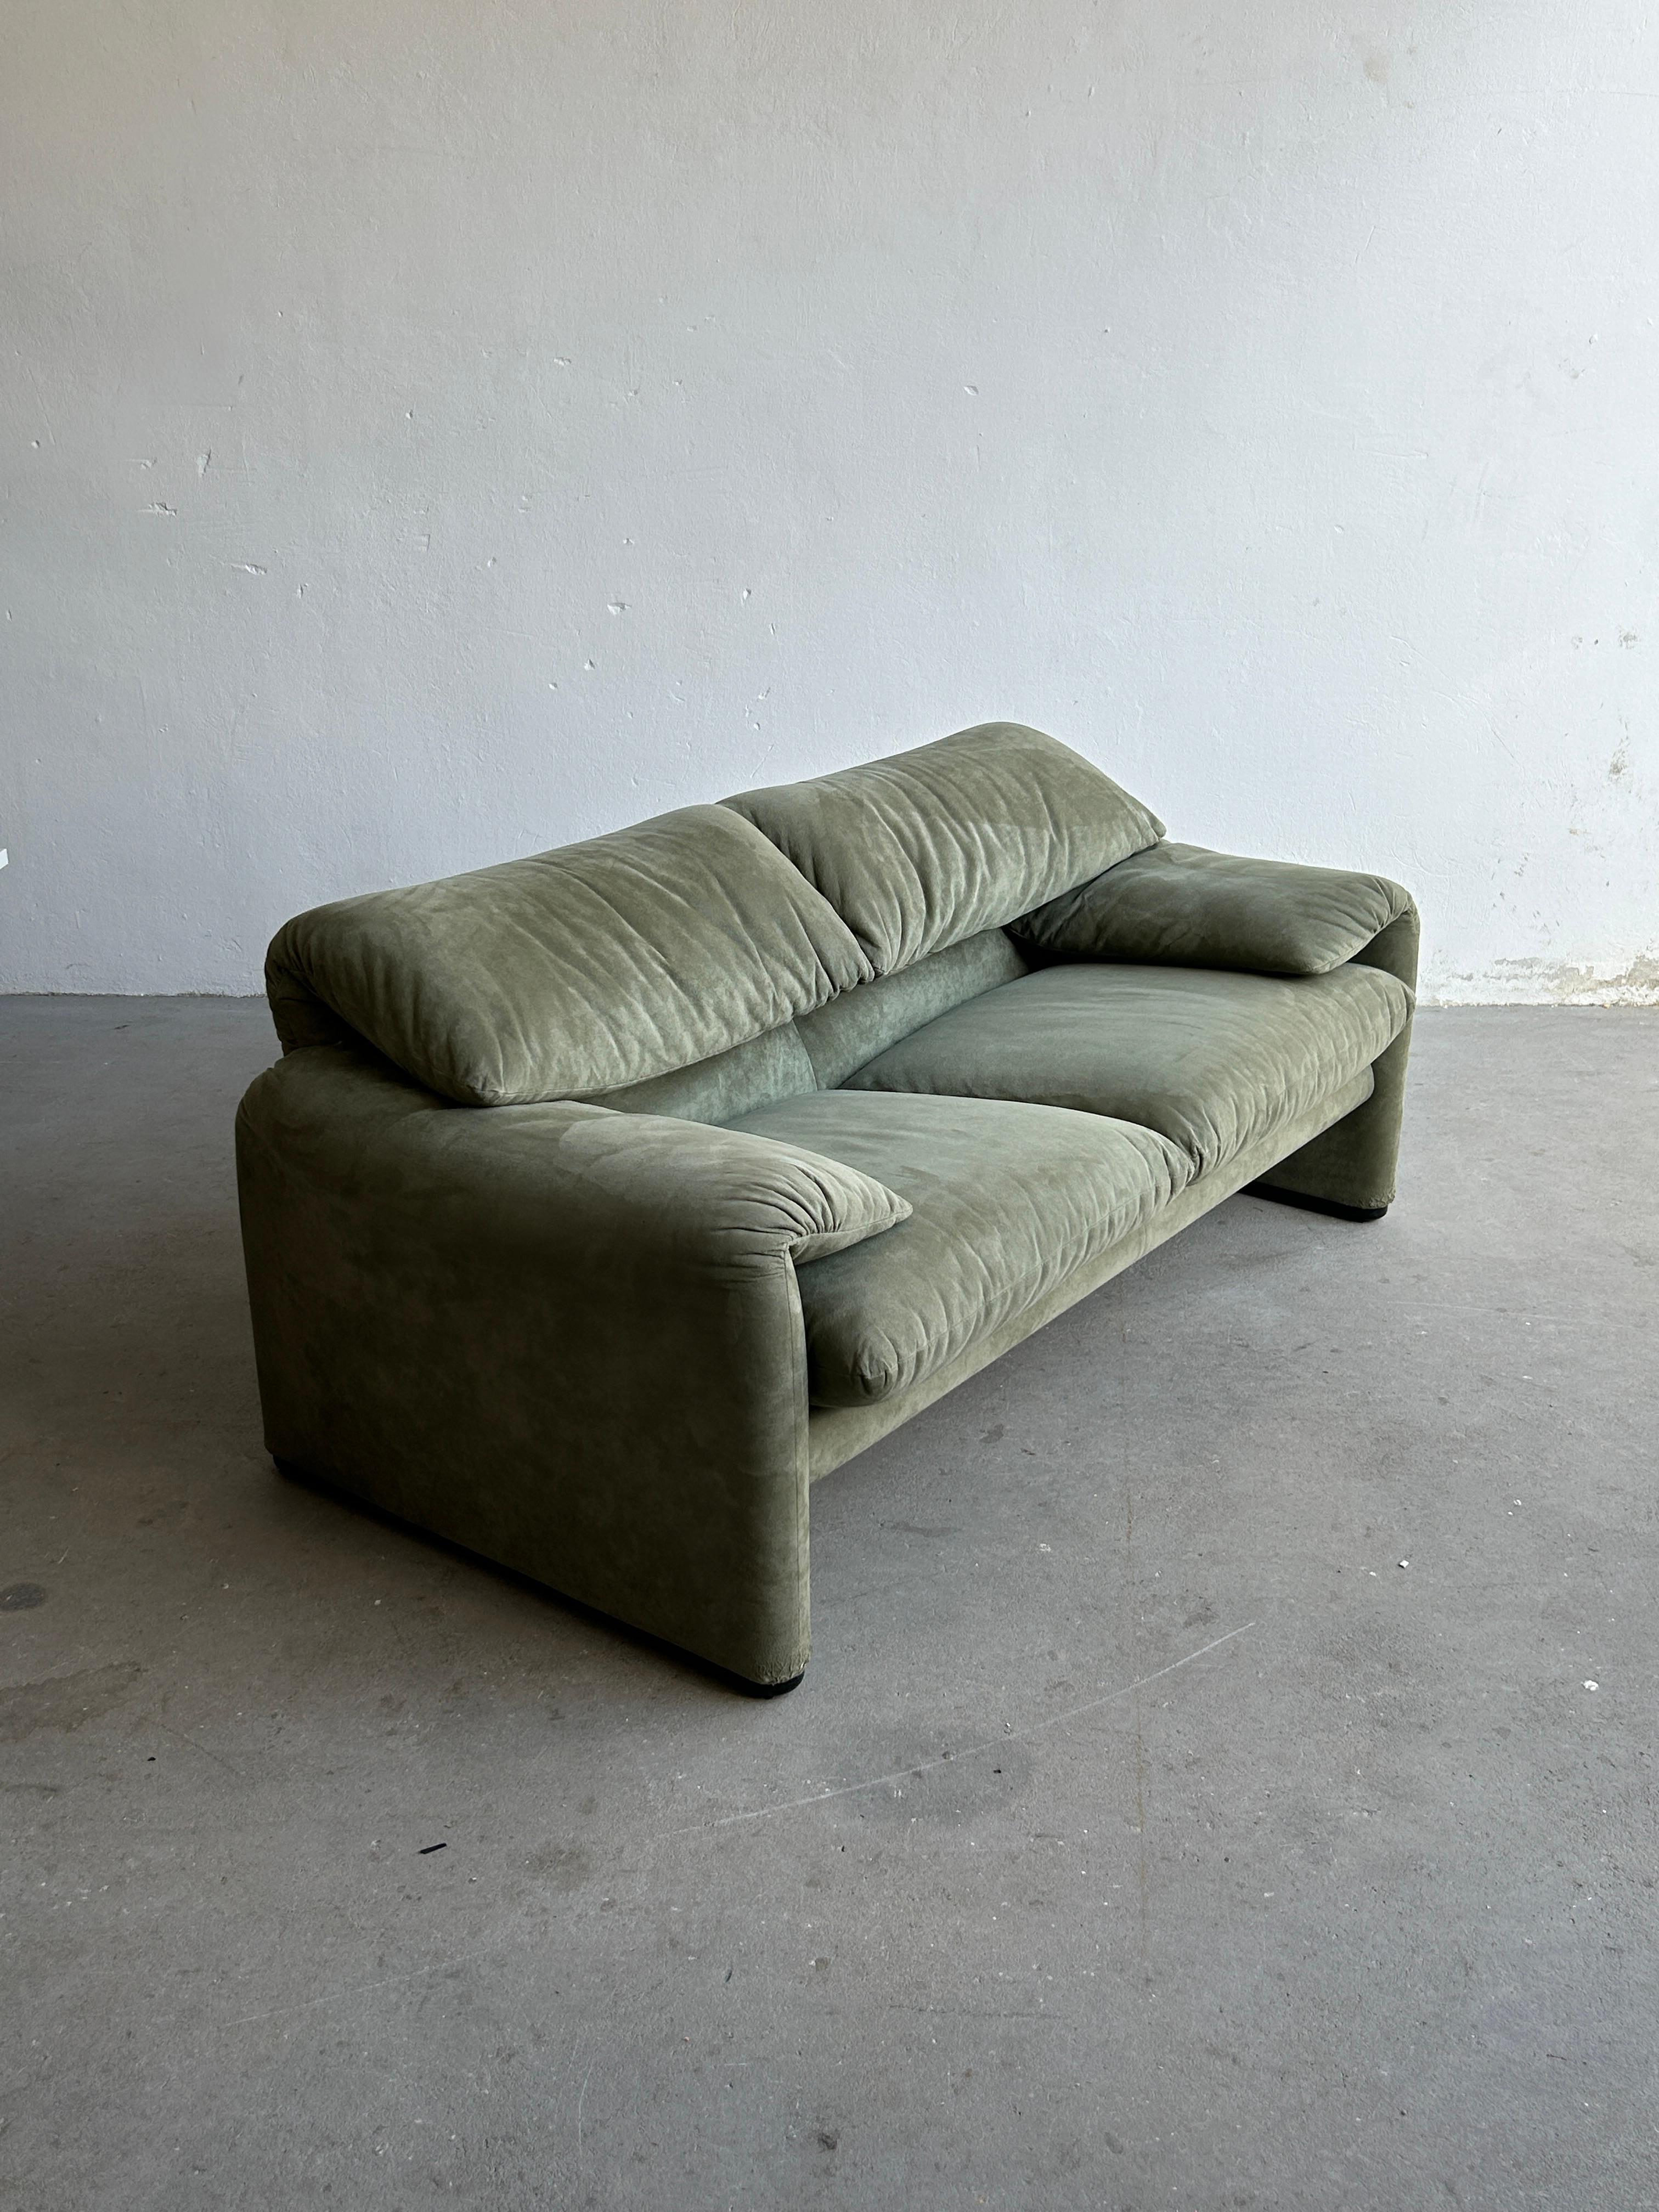 Very exciting and rare, 1970s designed original iconic 'Maralunga' two-seater sofa, designed by Vico Magistretti for Cassina.
Labeled with the original Cassina label.

Early 2000s production in green alcantara.

In very good used condition and